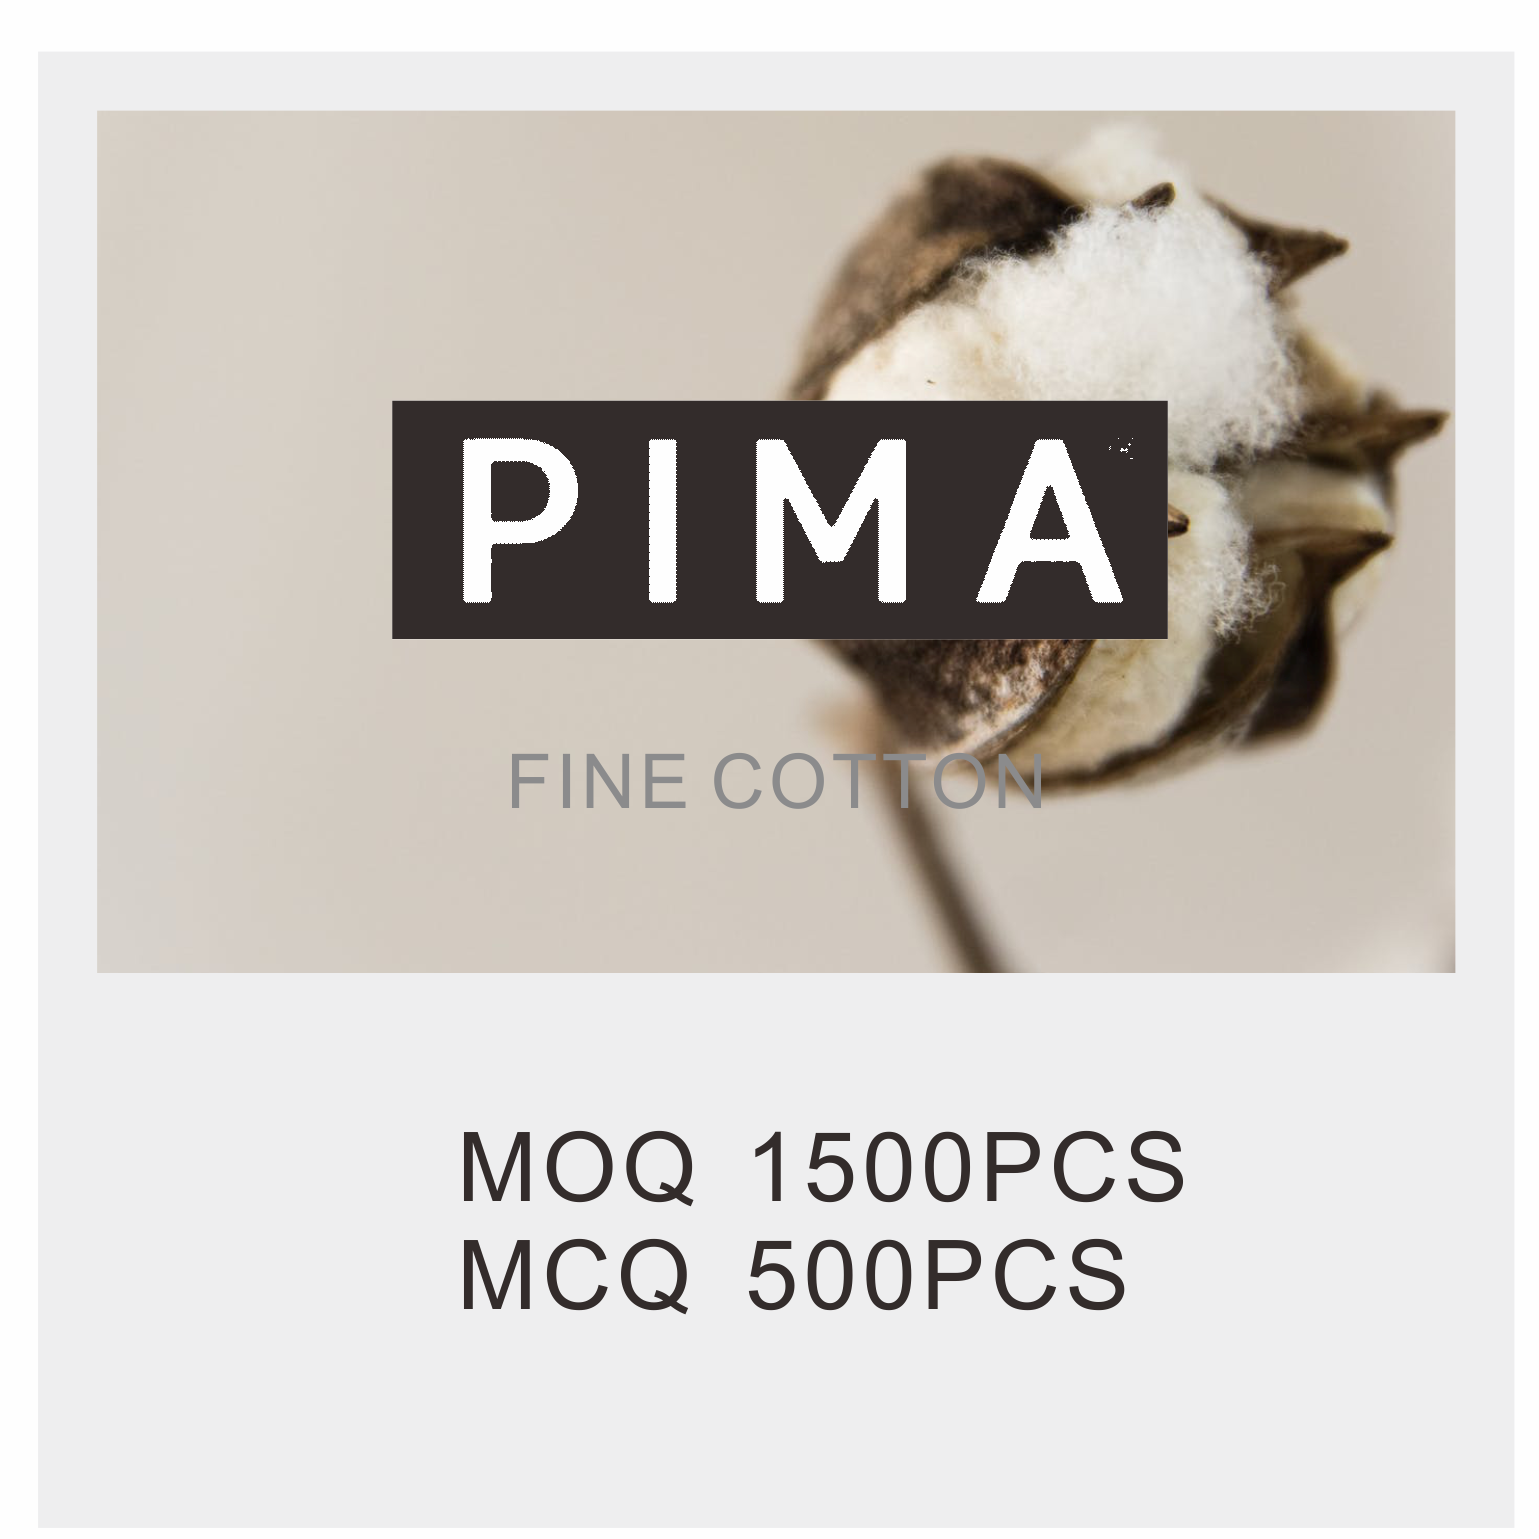 pima for athletic wear from fitfever